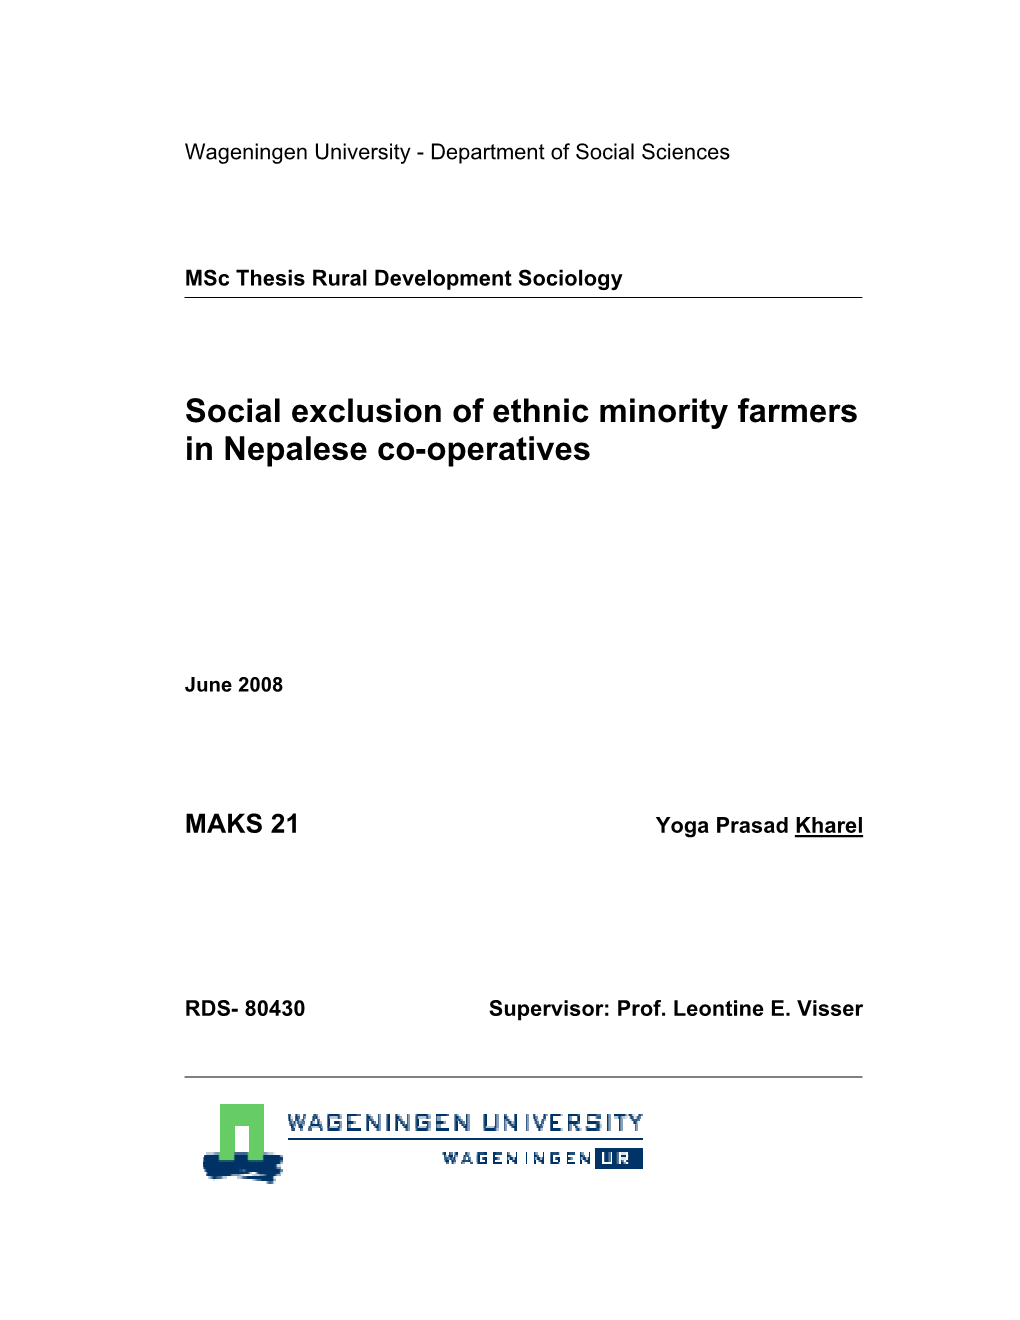 Social Exclusion of Ethnic Minority Farmers in Nepalese Co-Operatives